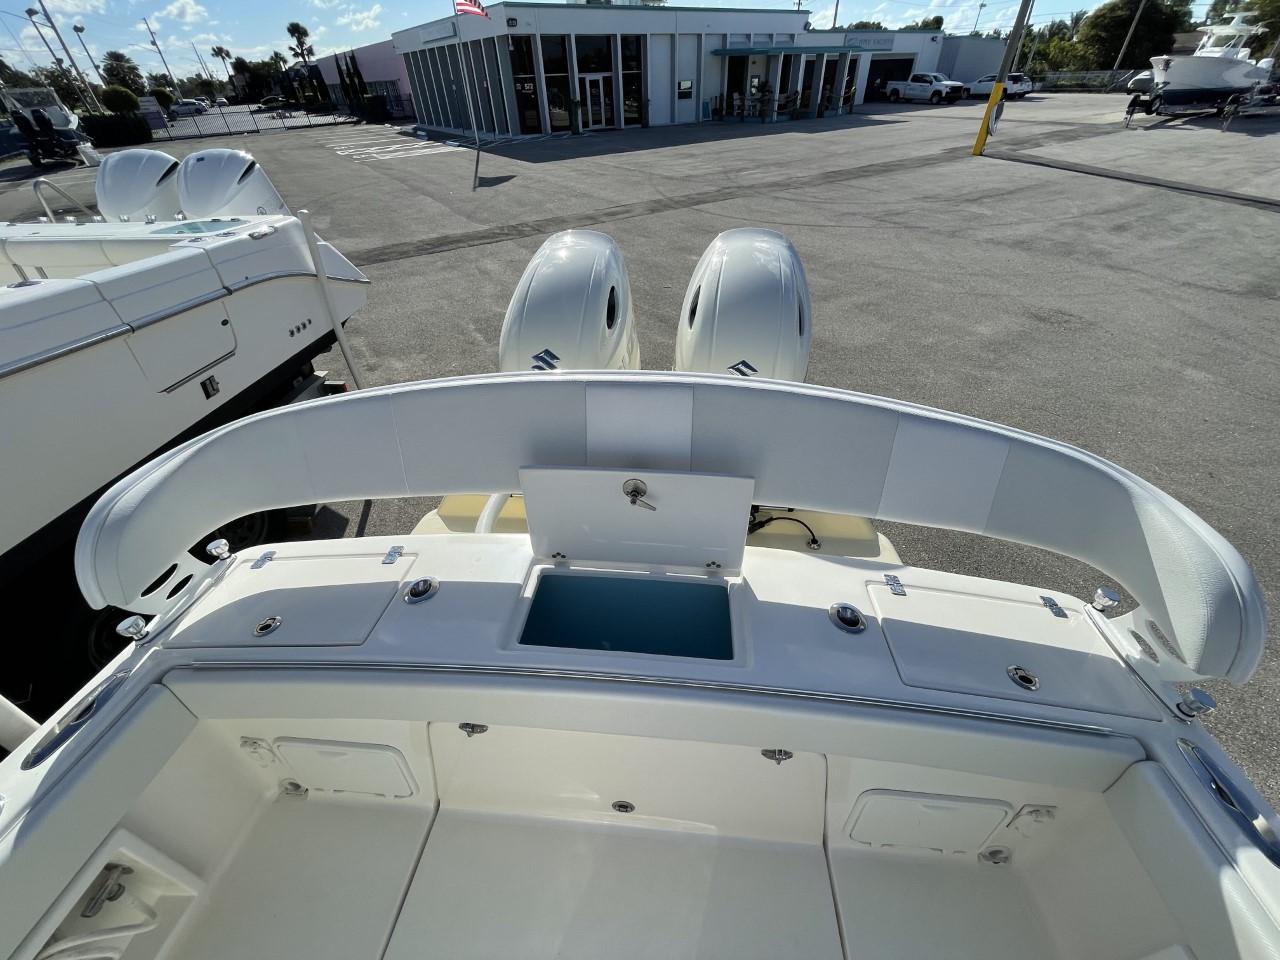 2008 Silverhawk 2700cc Colleen -transom livewell